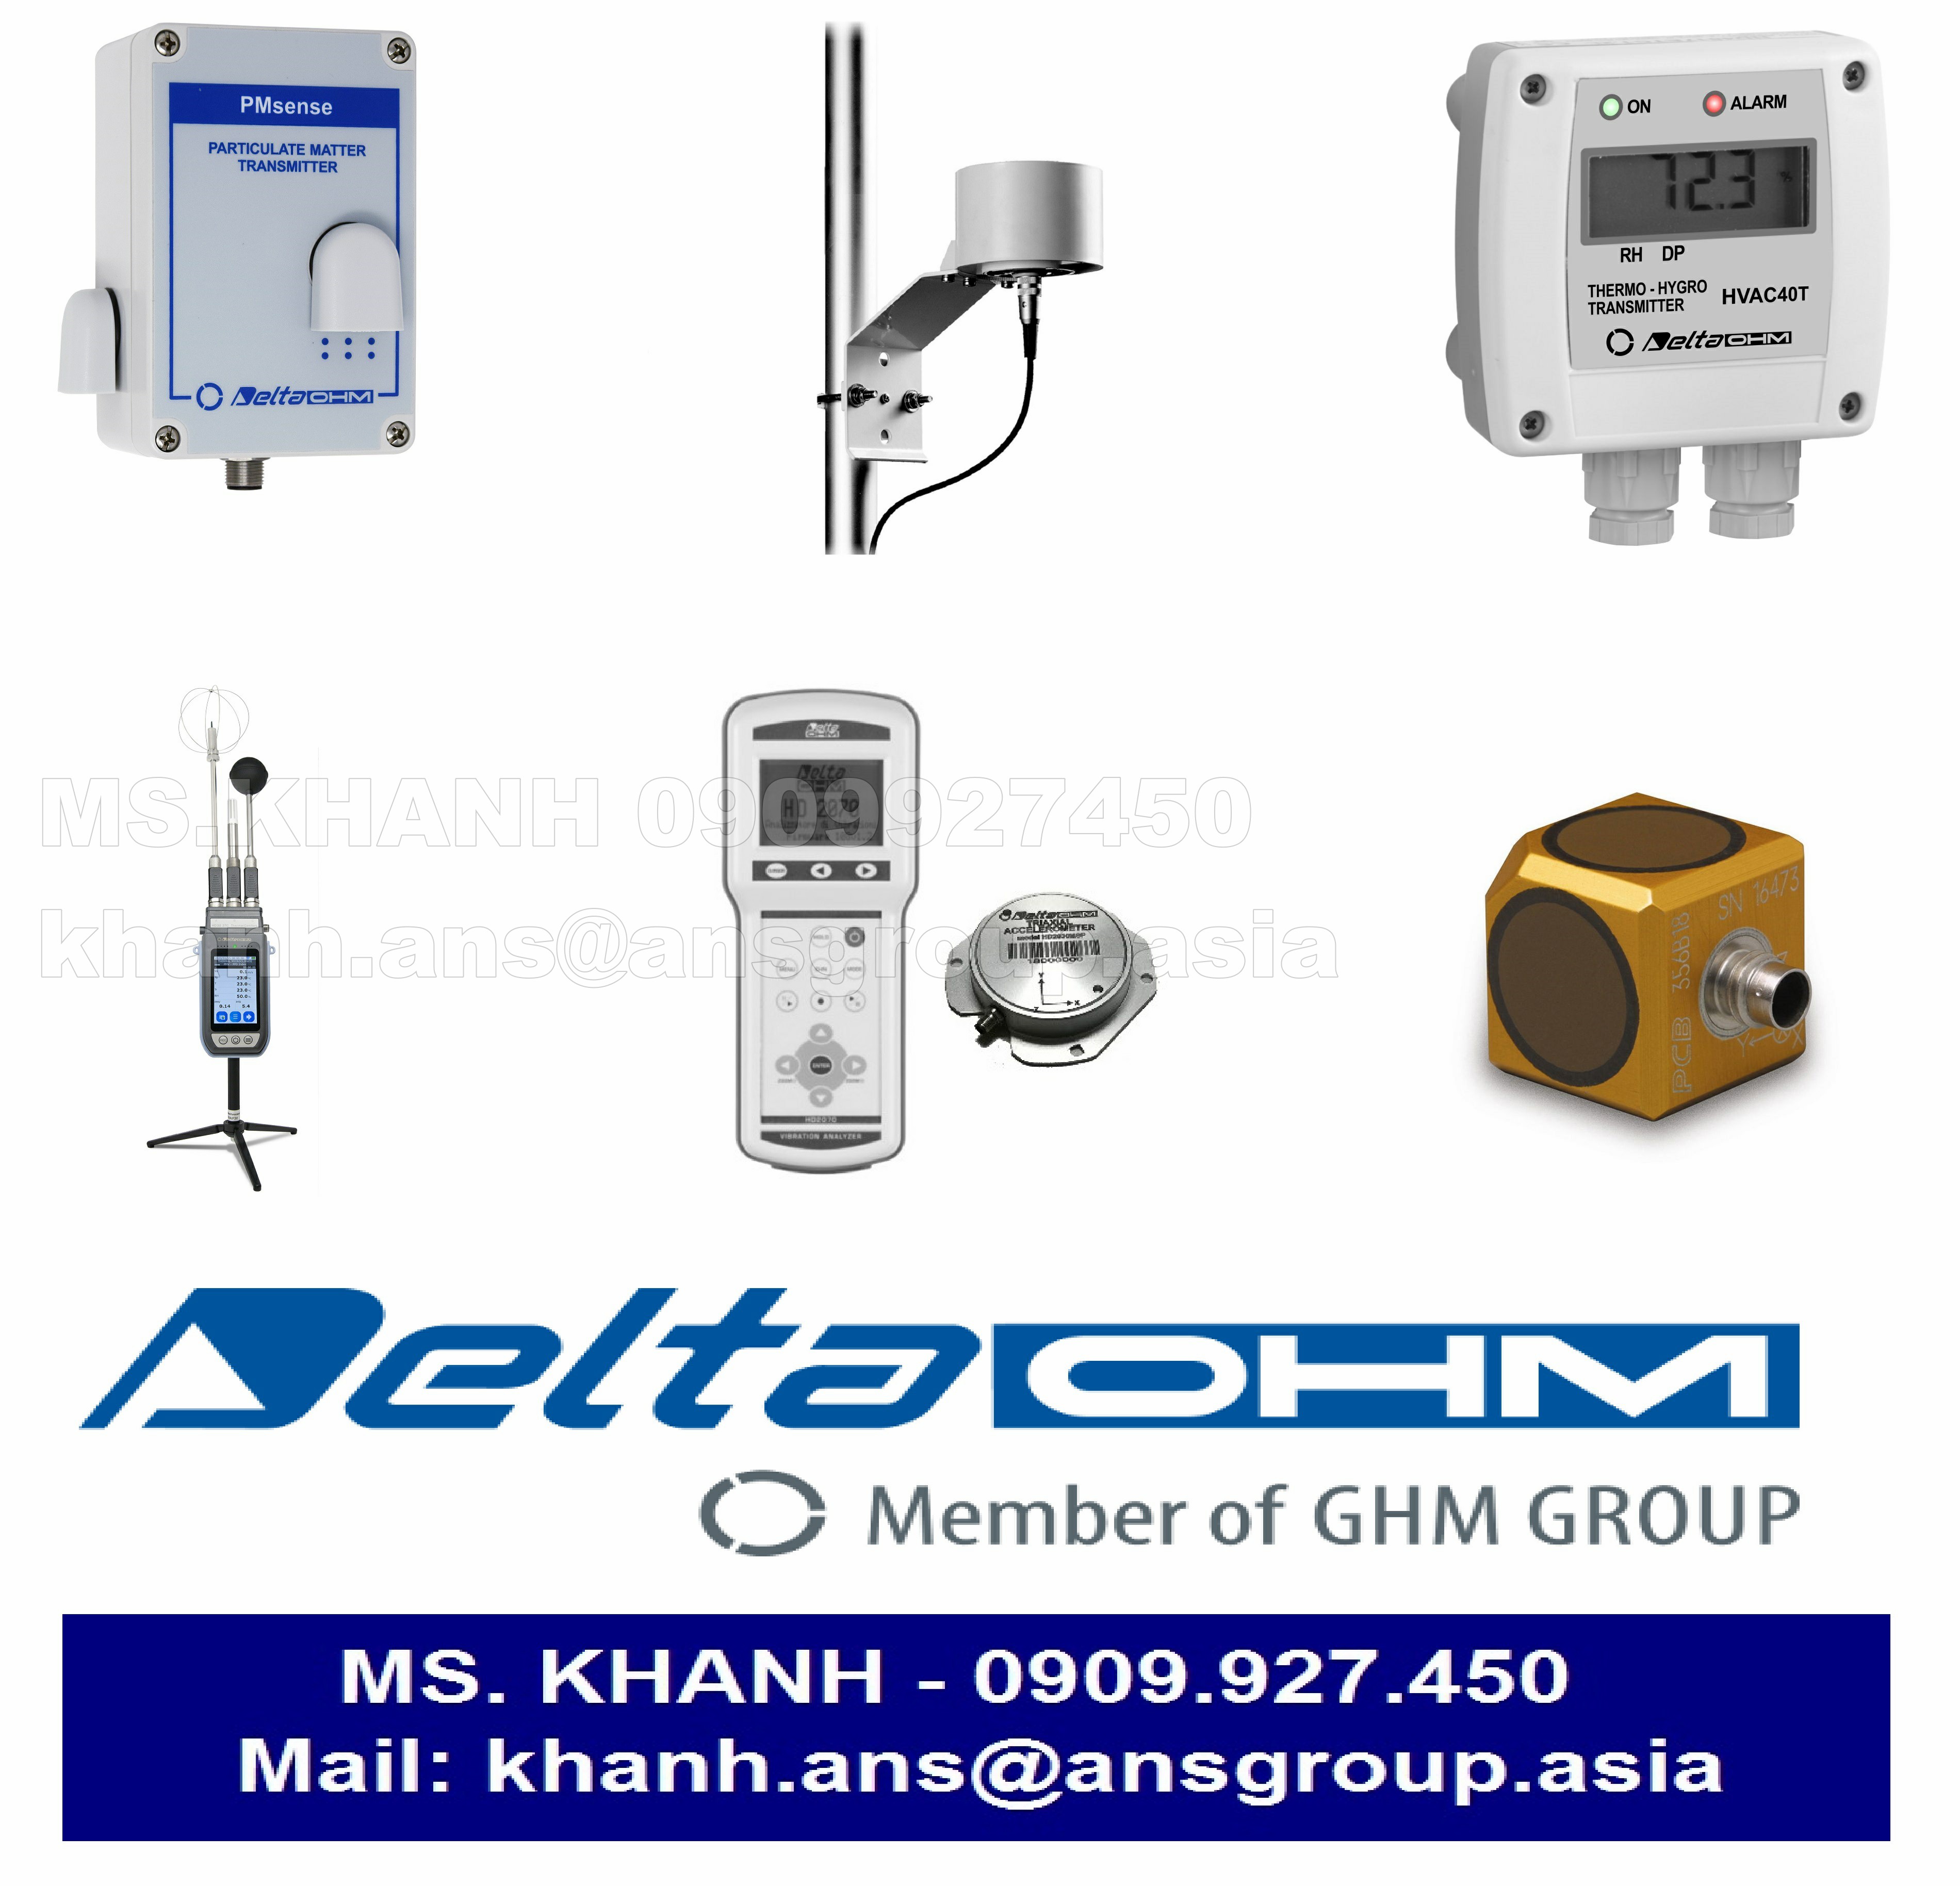 may-do-ph-nhiet-ke-hd2105-1-phmeter-thermometer-not-include-probe-delta-ohm-chinh-hang.png